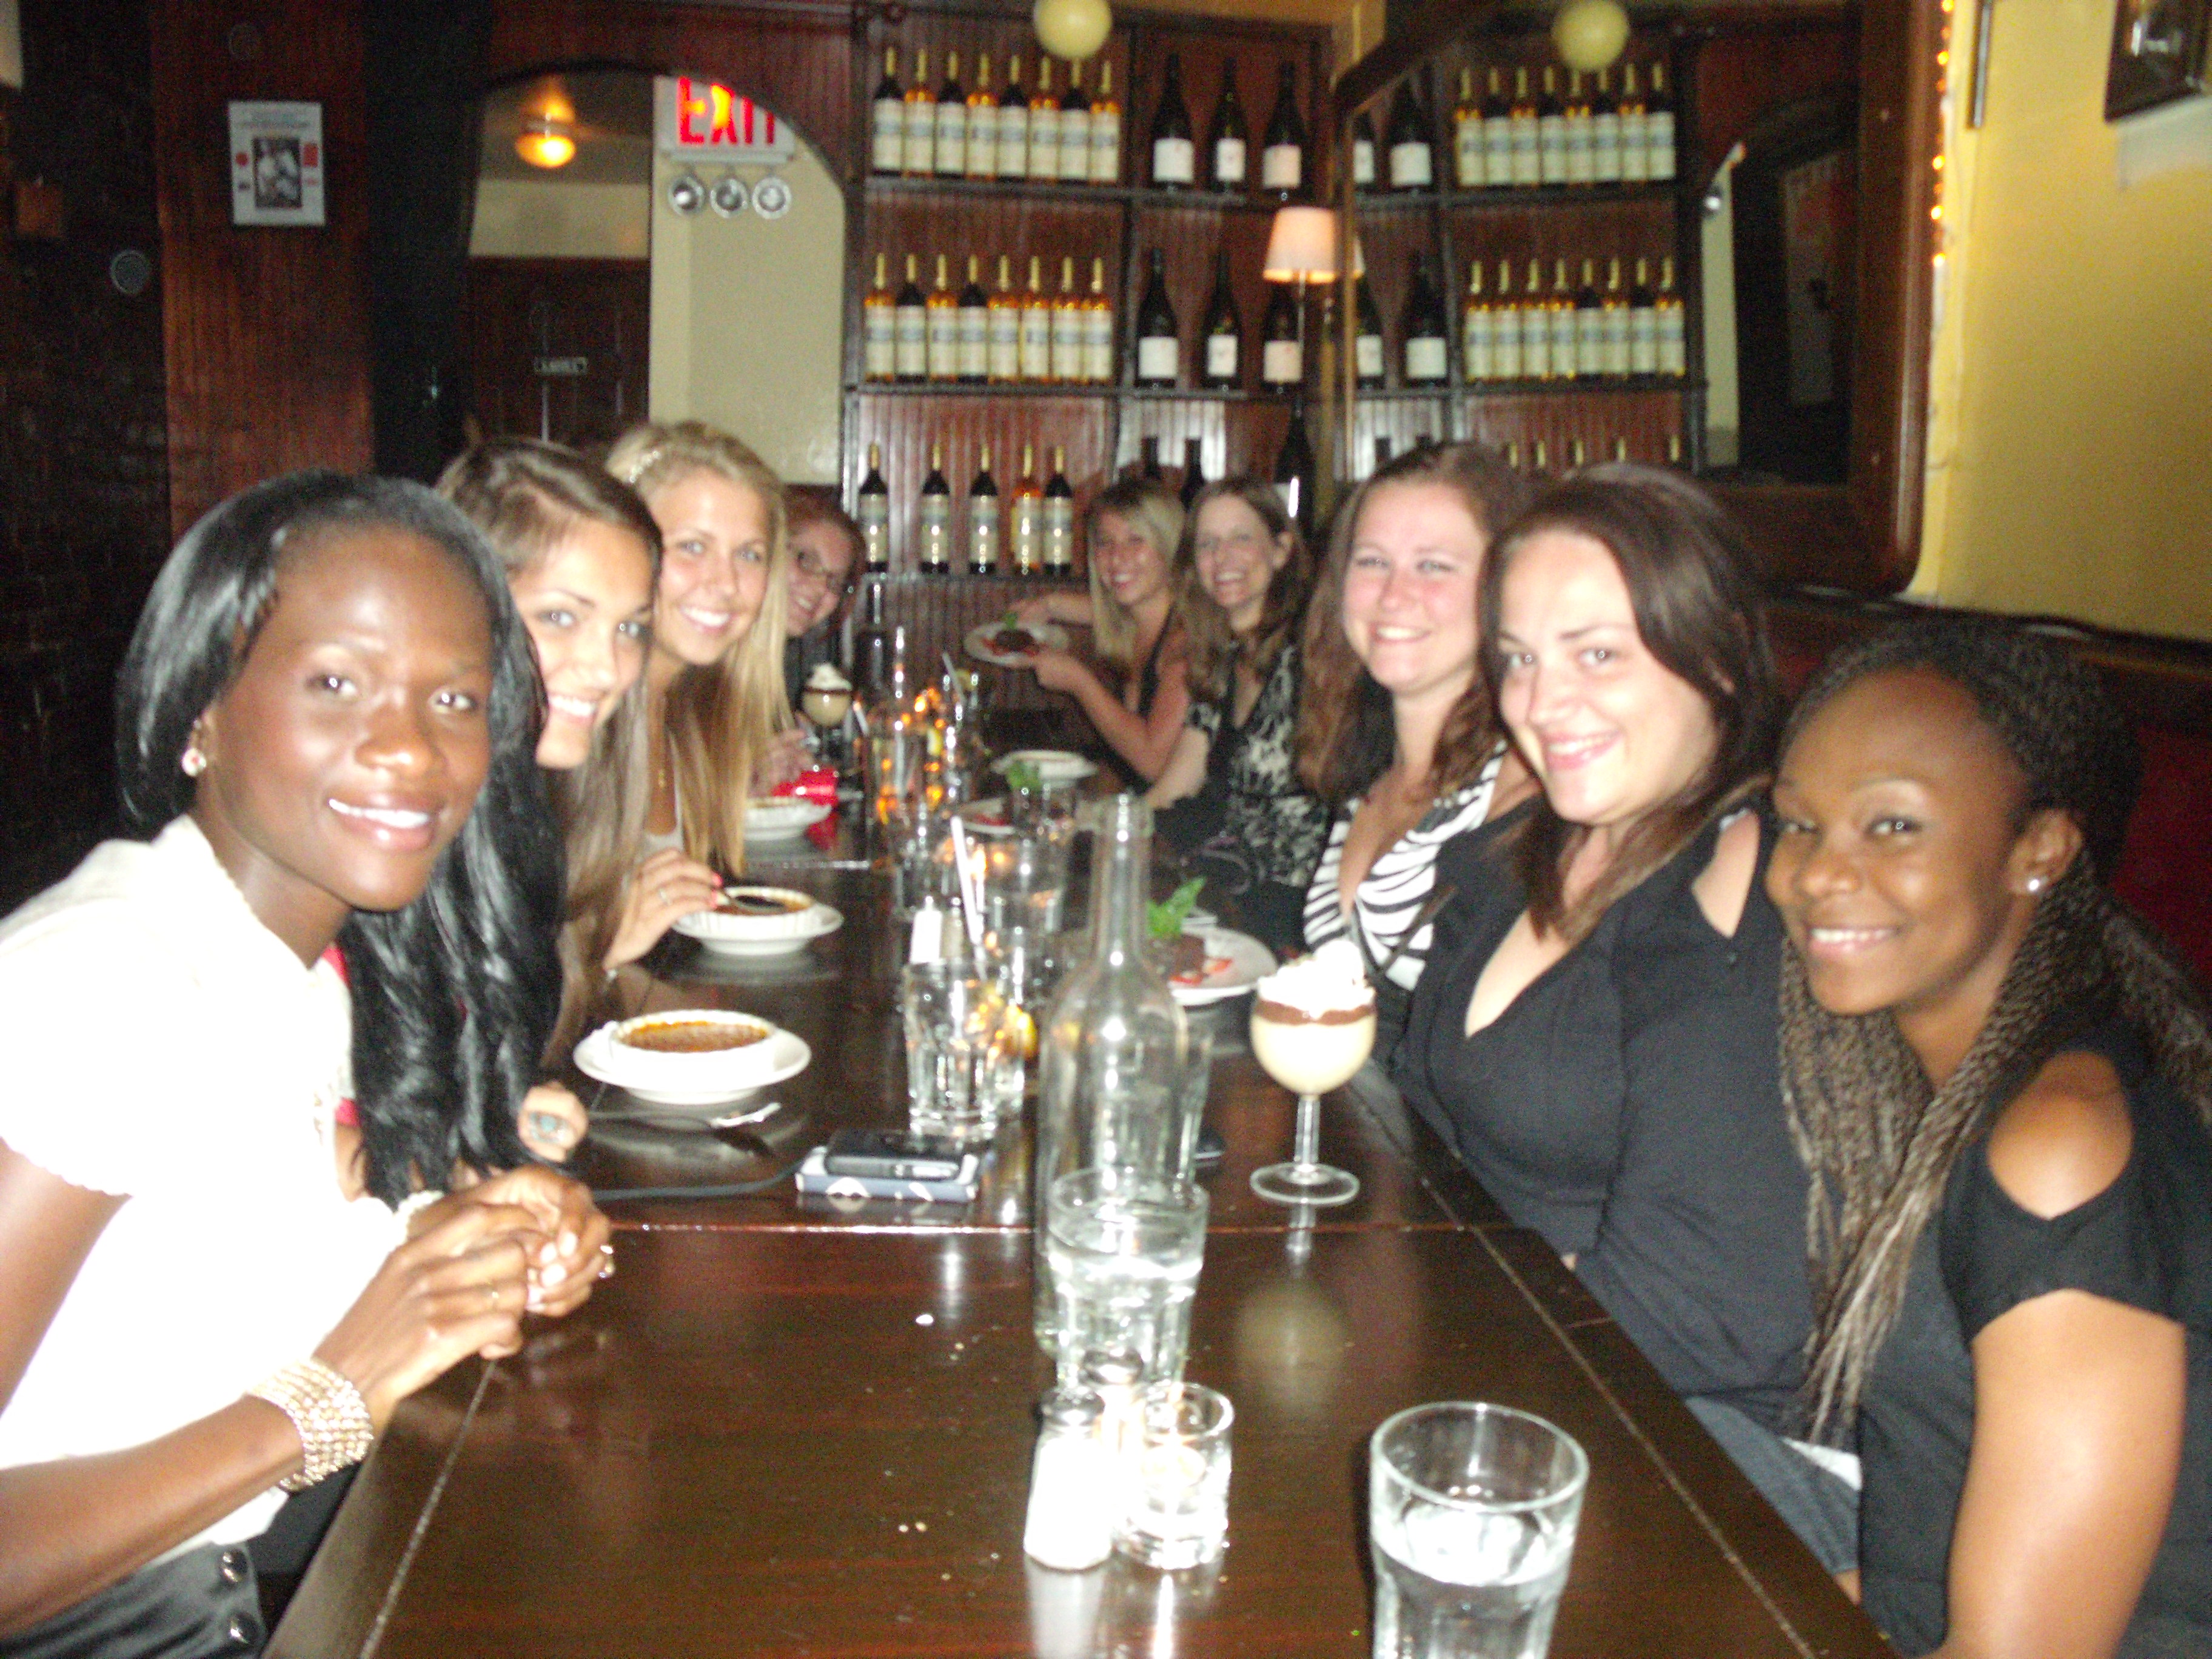 A group shot at dinner in New York.